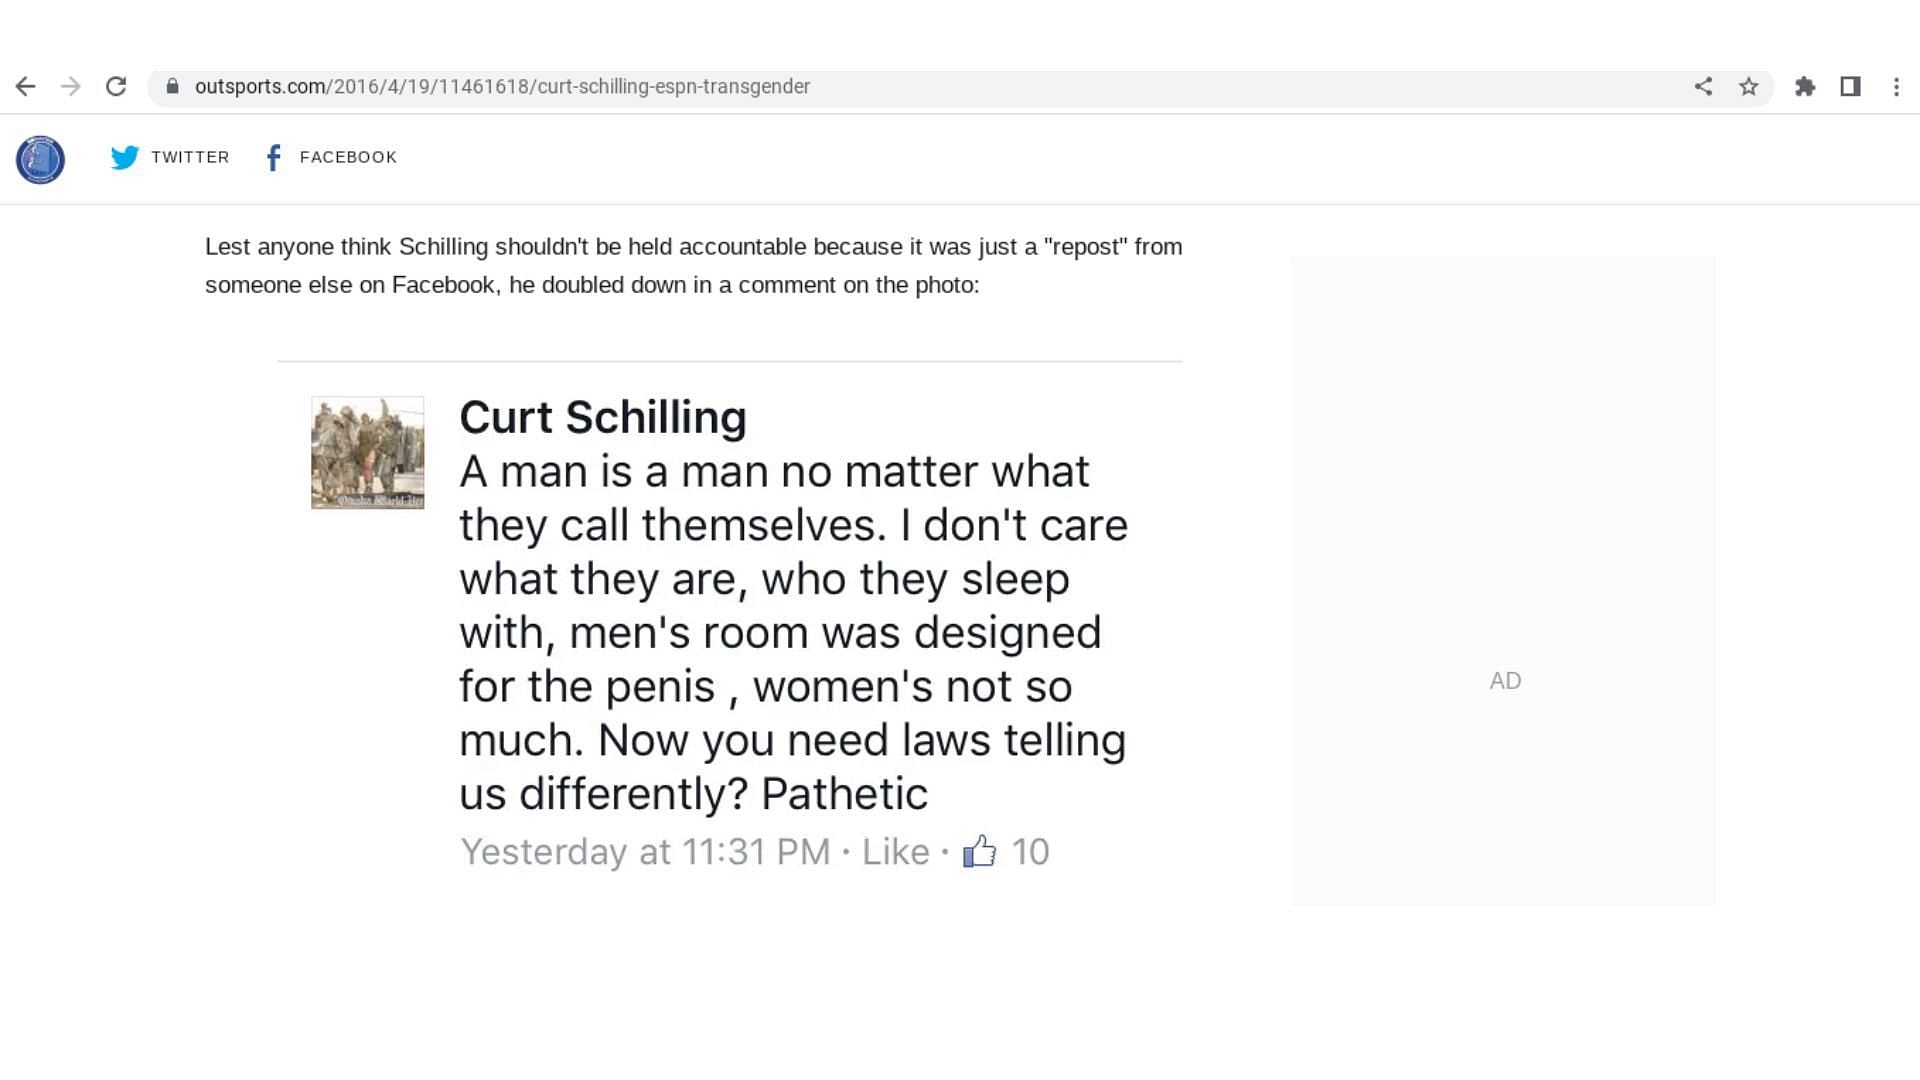 Curt Schilling&#039;s disputed comment under his Facebook post in 2016.